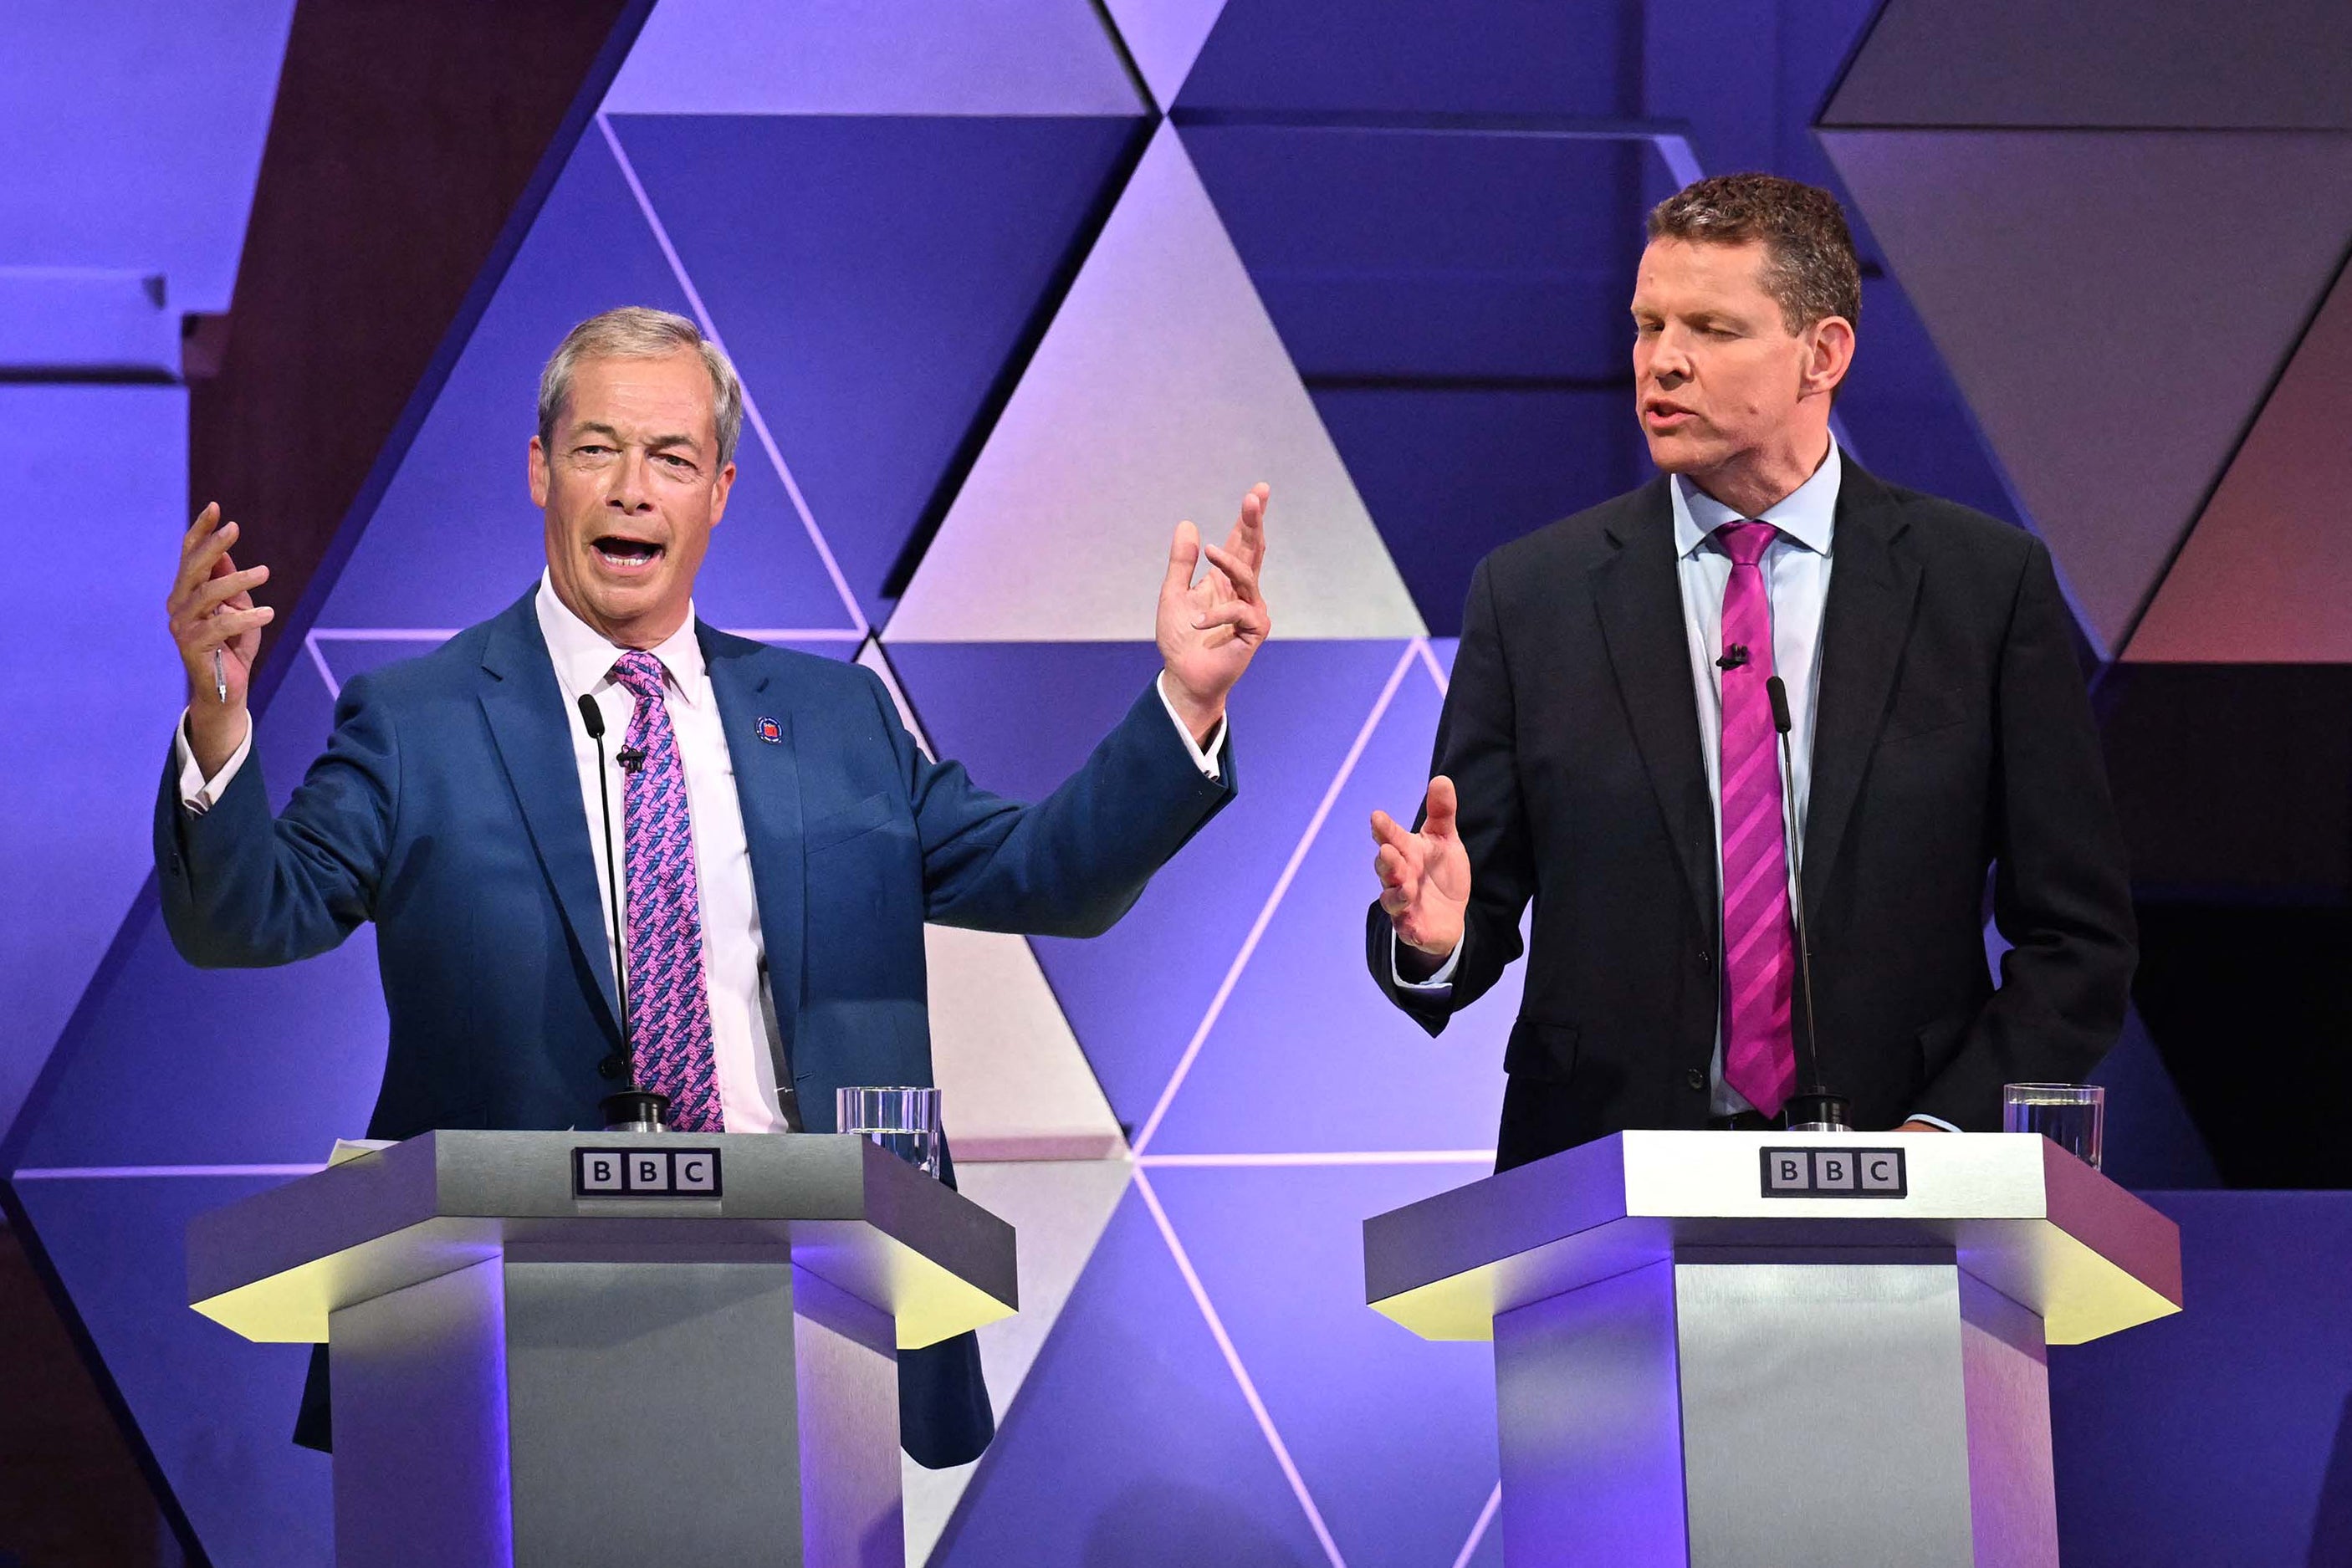 Farage argues with the panellist from Plaid